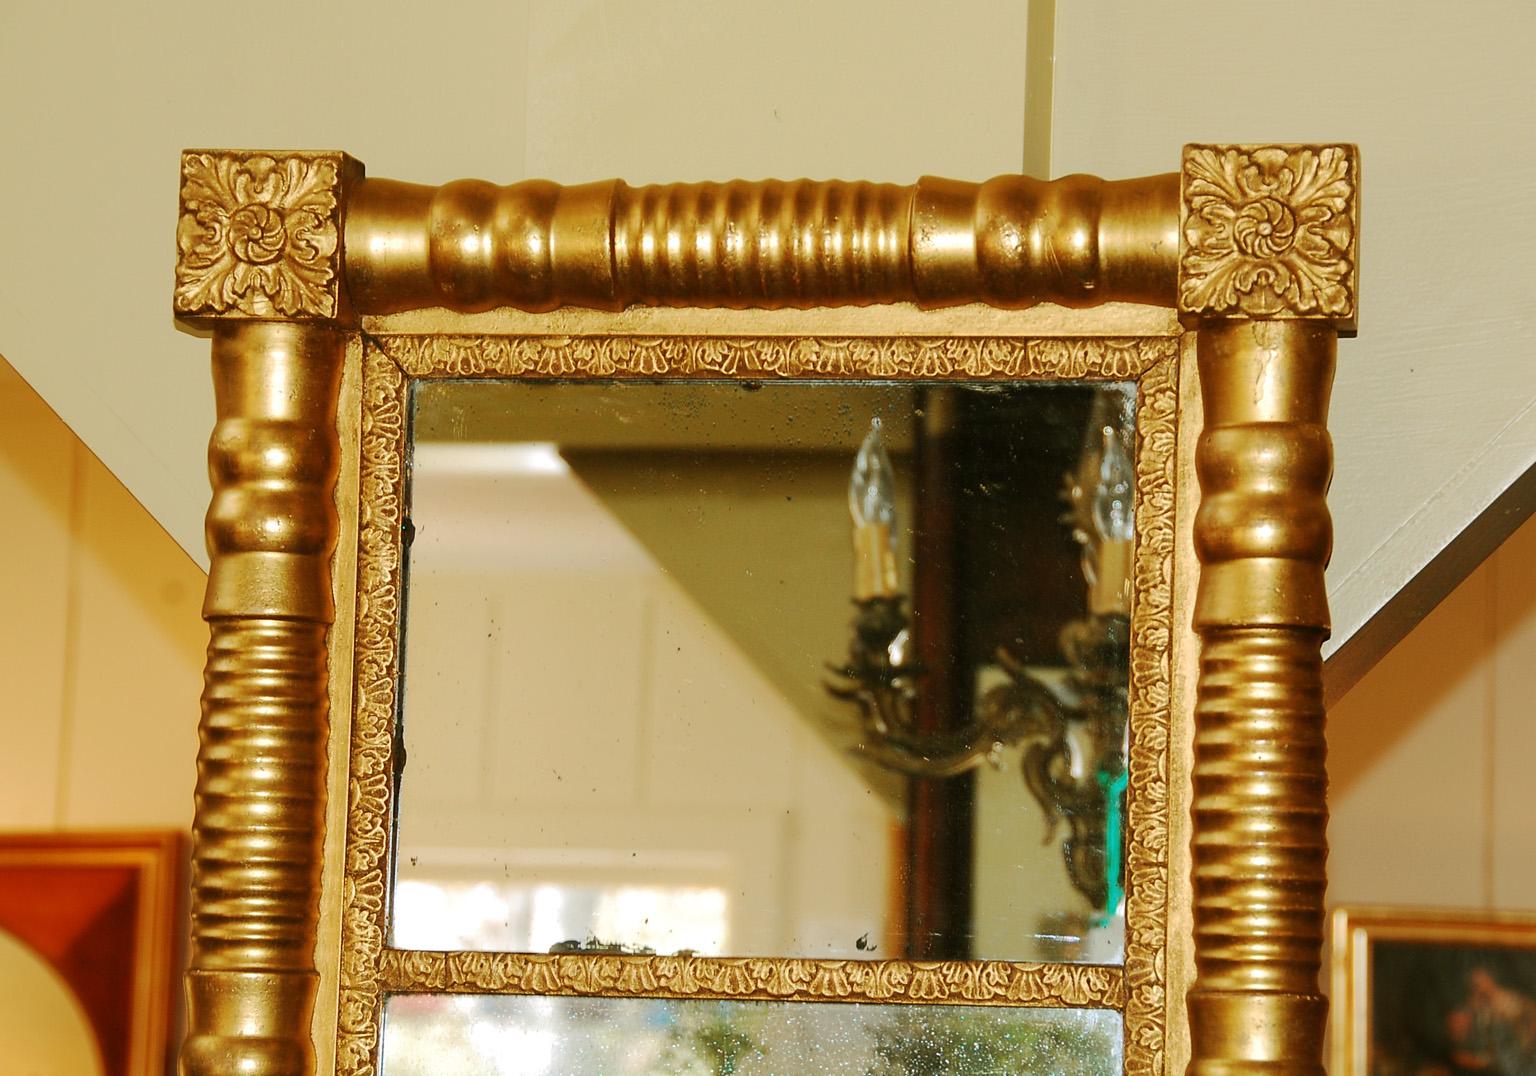 American Federal gold leaf mirror with hand turned ribbed half column pilasters, fancy inner border, and square corners with acanthus leaves. This two part vertical mirror has original mirror in both sections and the gold leaf is in excellent